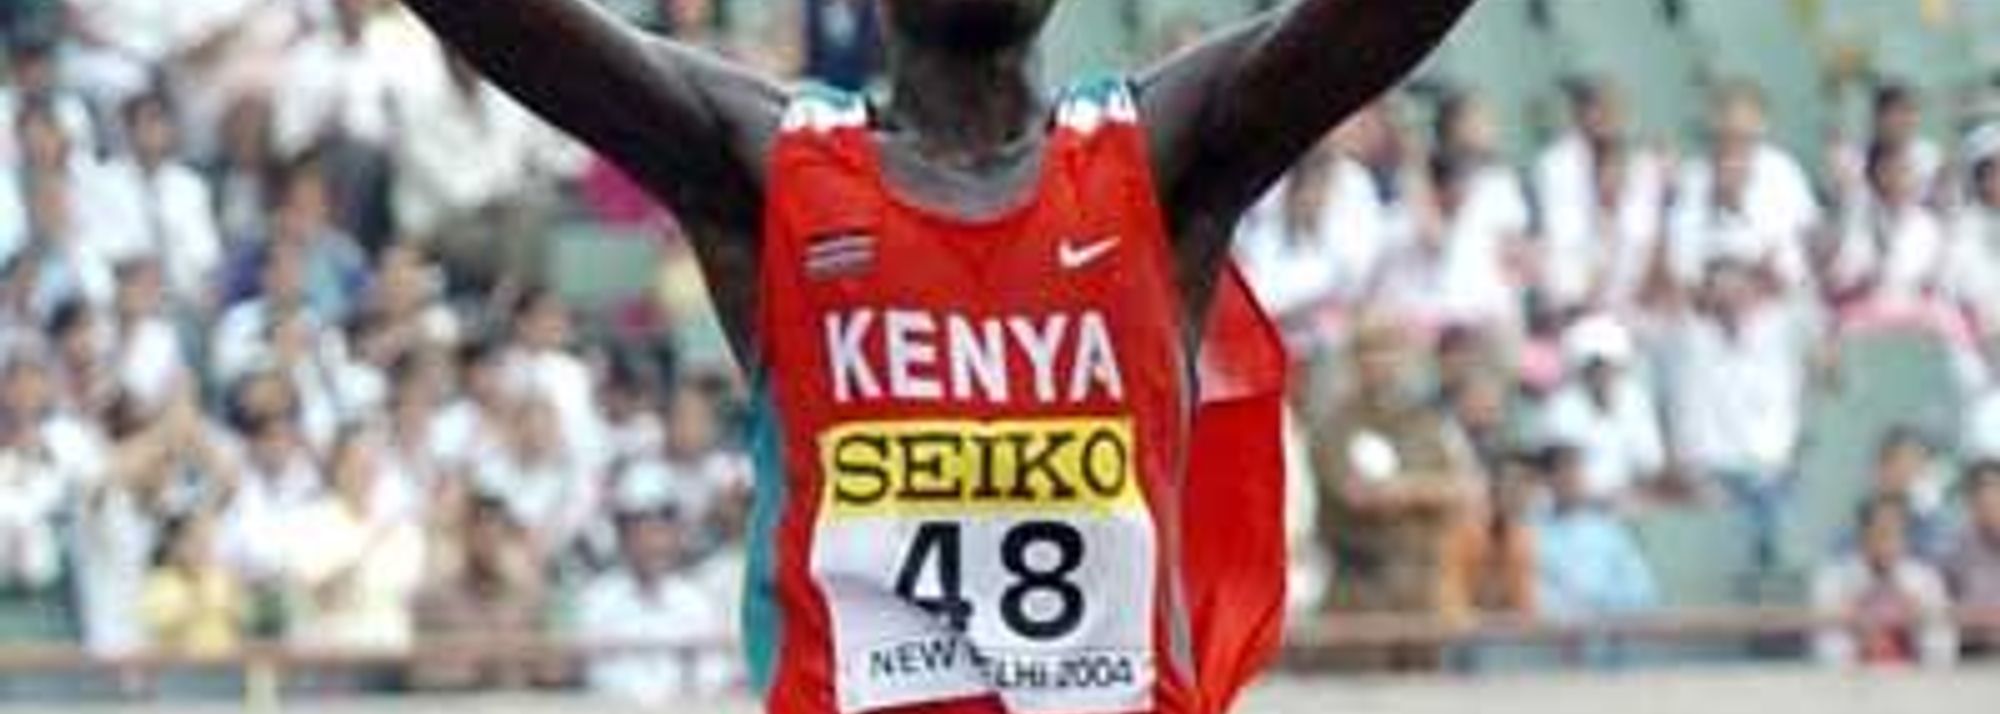 Kenya’s Paul Kirui became the first man ever to win a World Half Marathon title on Asian soil when he crossed the finish line in the Jawaharlal Nehru Stadium to take gold in the 13th IAAF World Half Marathon Championships.